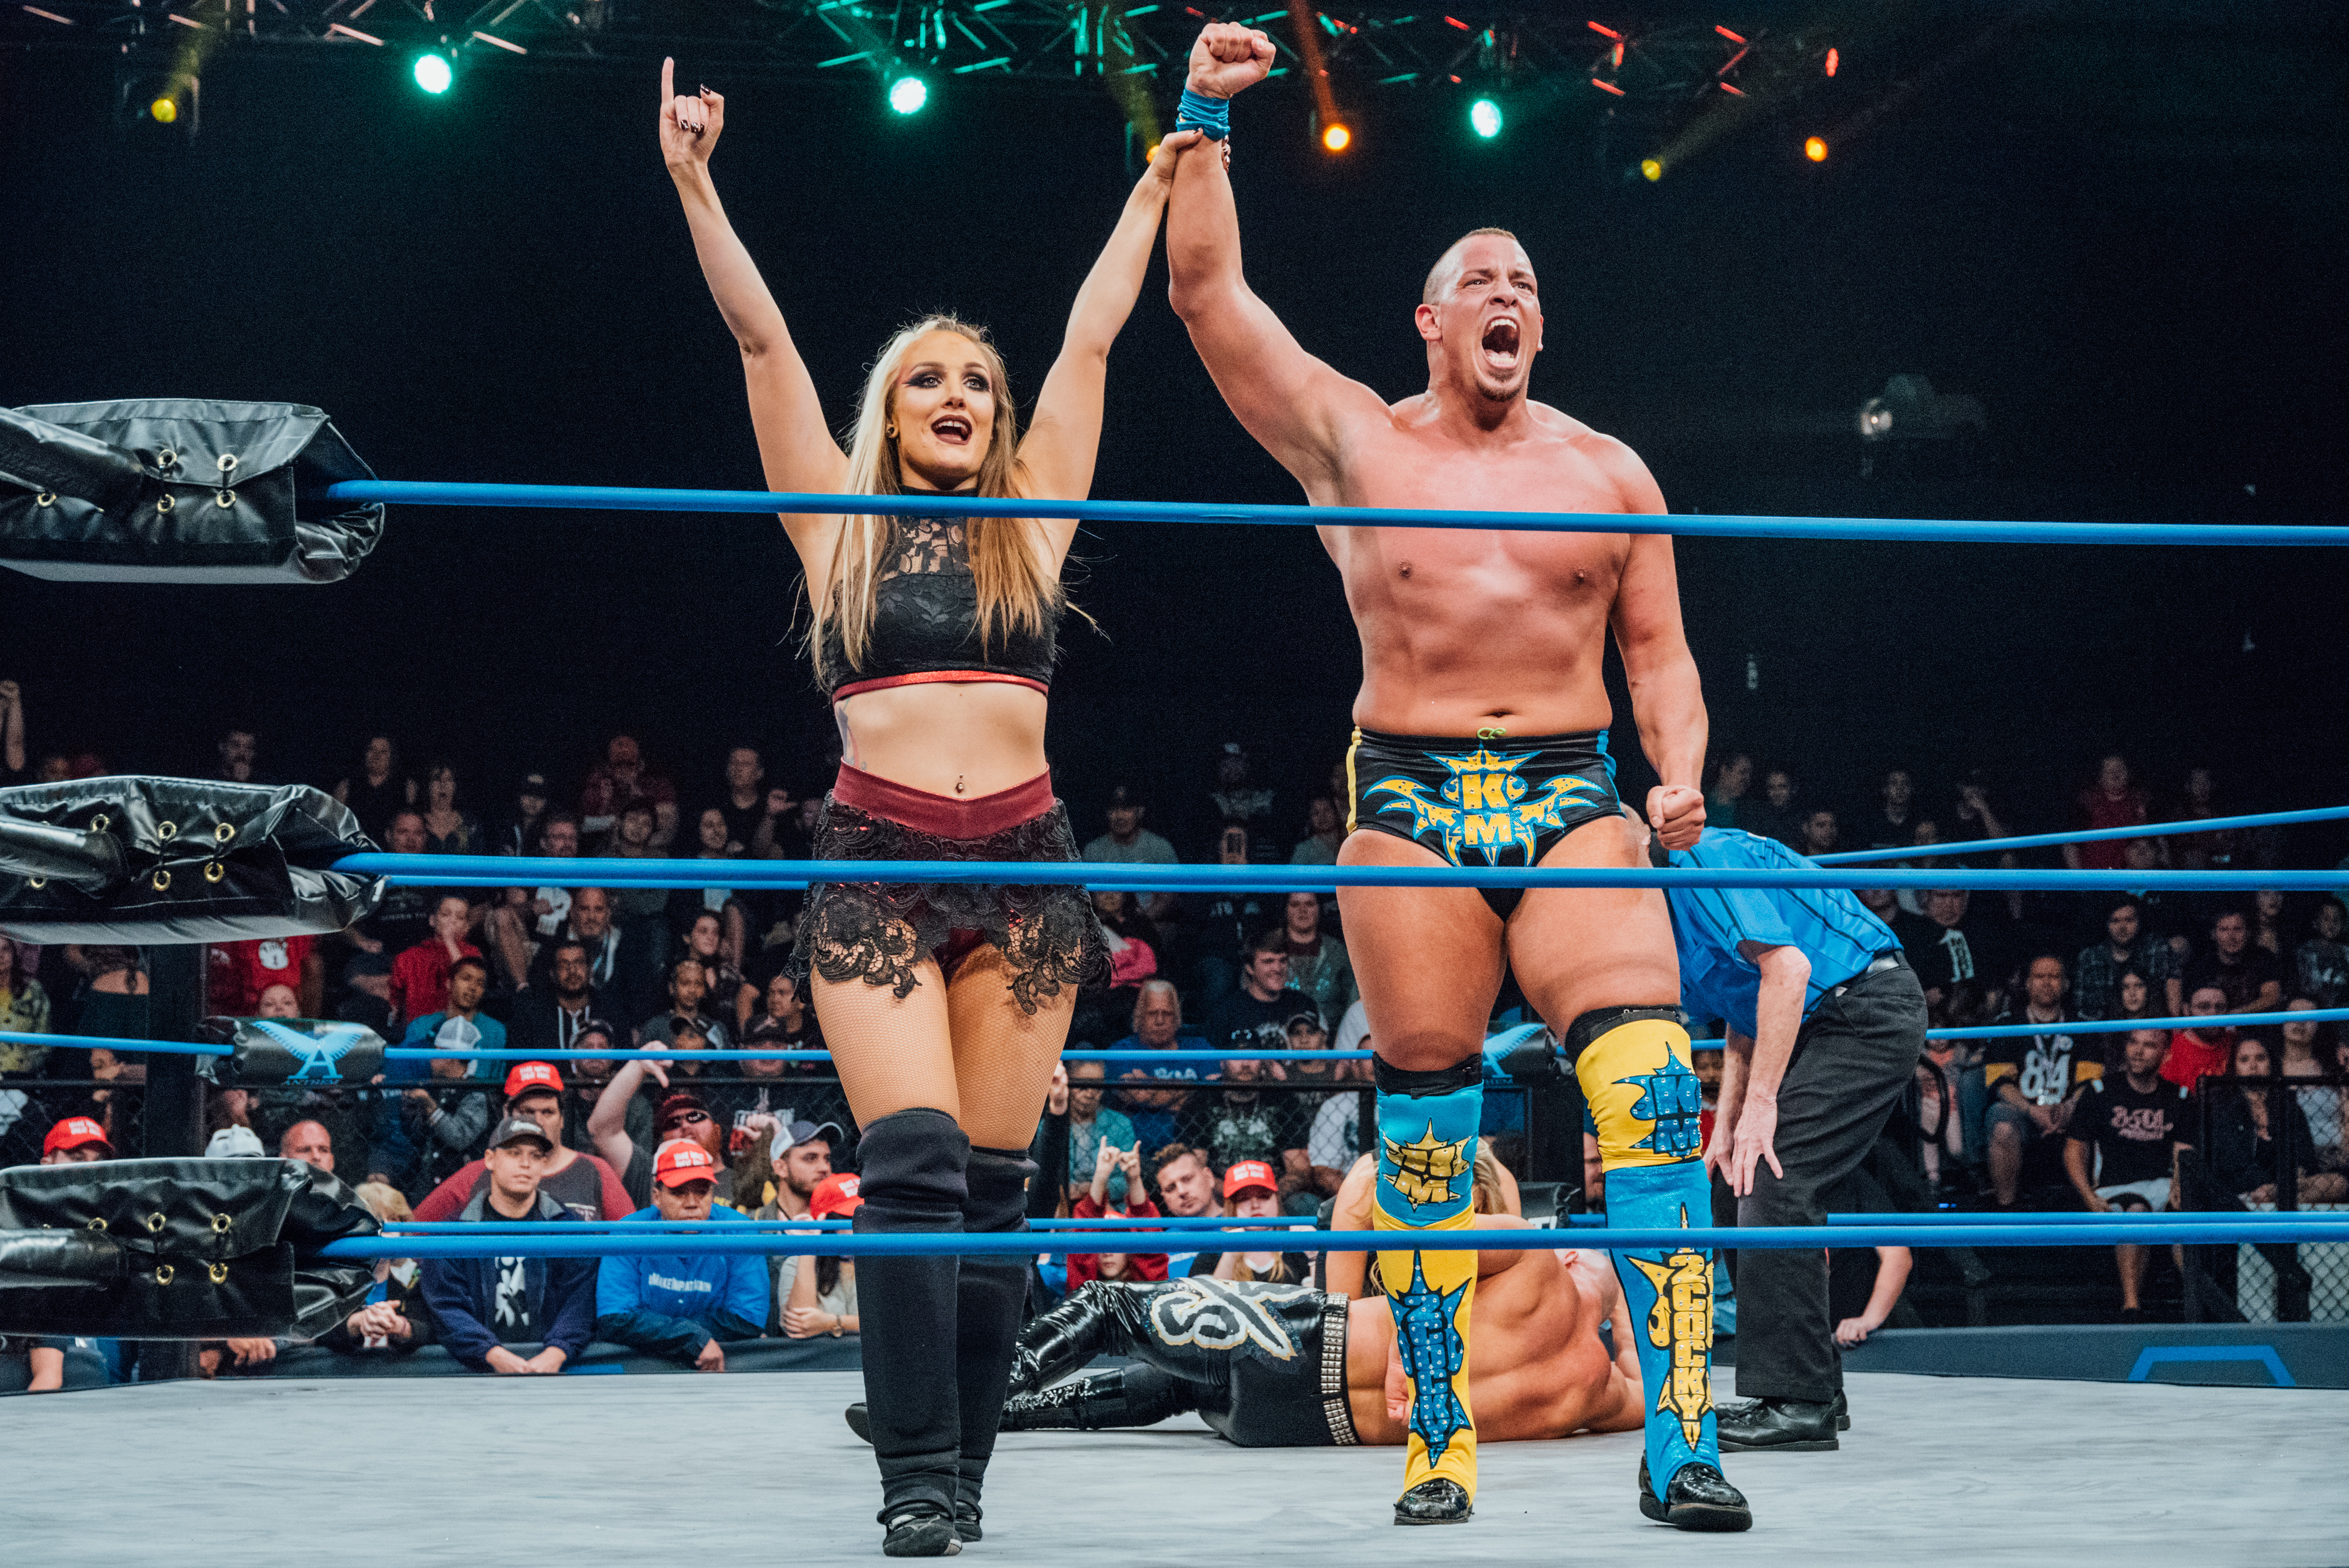 Exclusive: Impact Wrestling’s KM On The El Patron No Show, Planning To Go ‘Conor McGregor’ At Redemption, ‘Sloppy’ Wrestlers, More